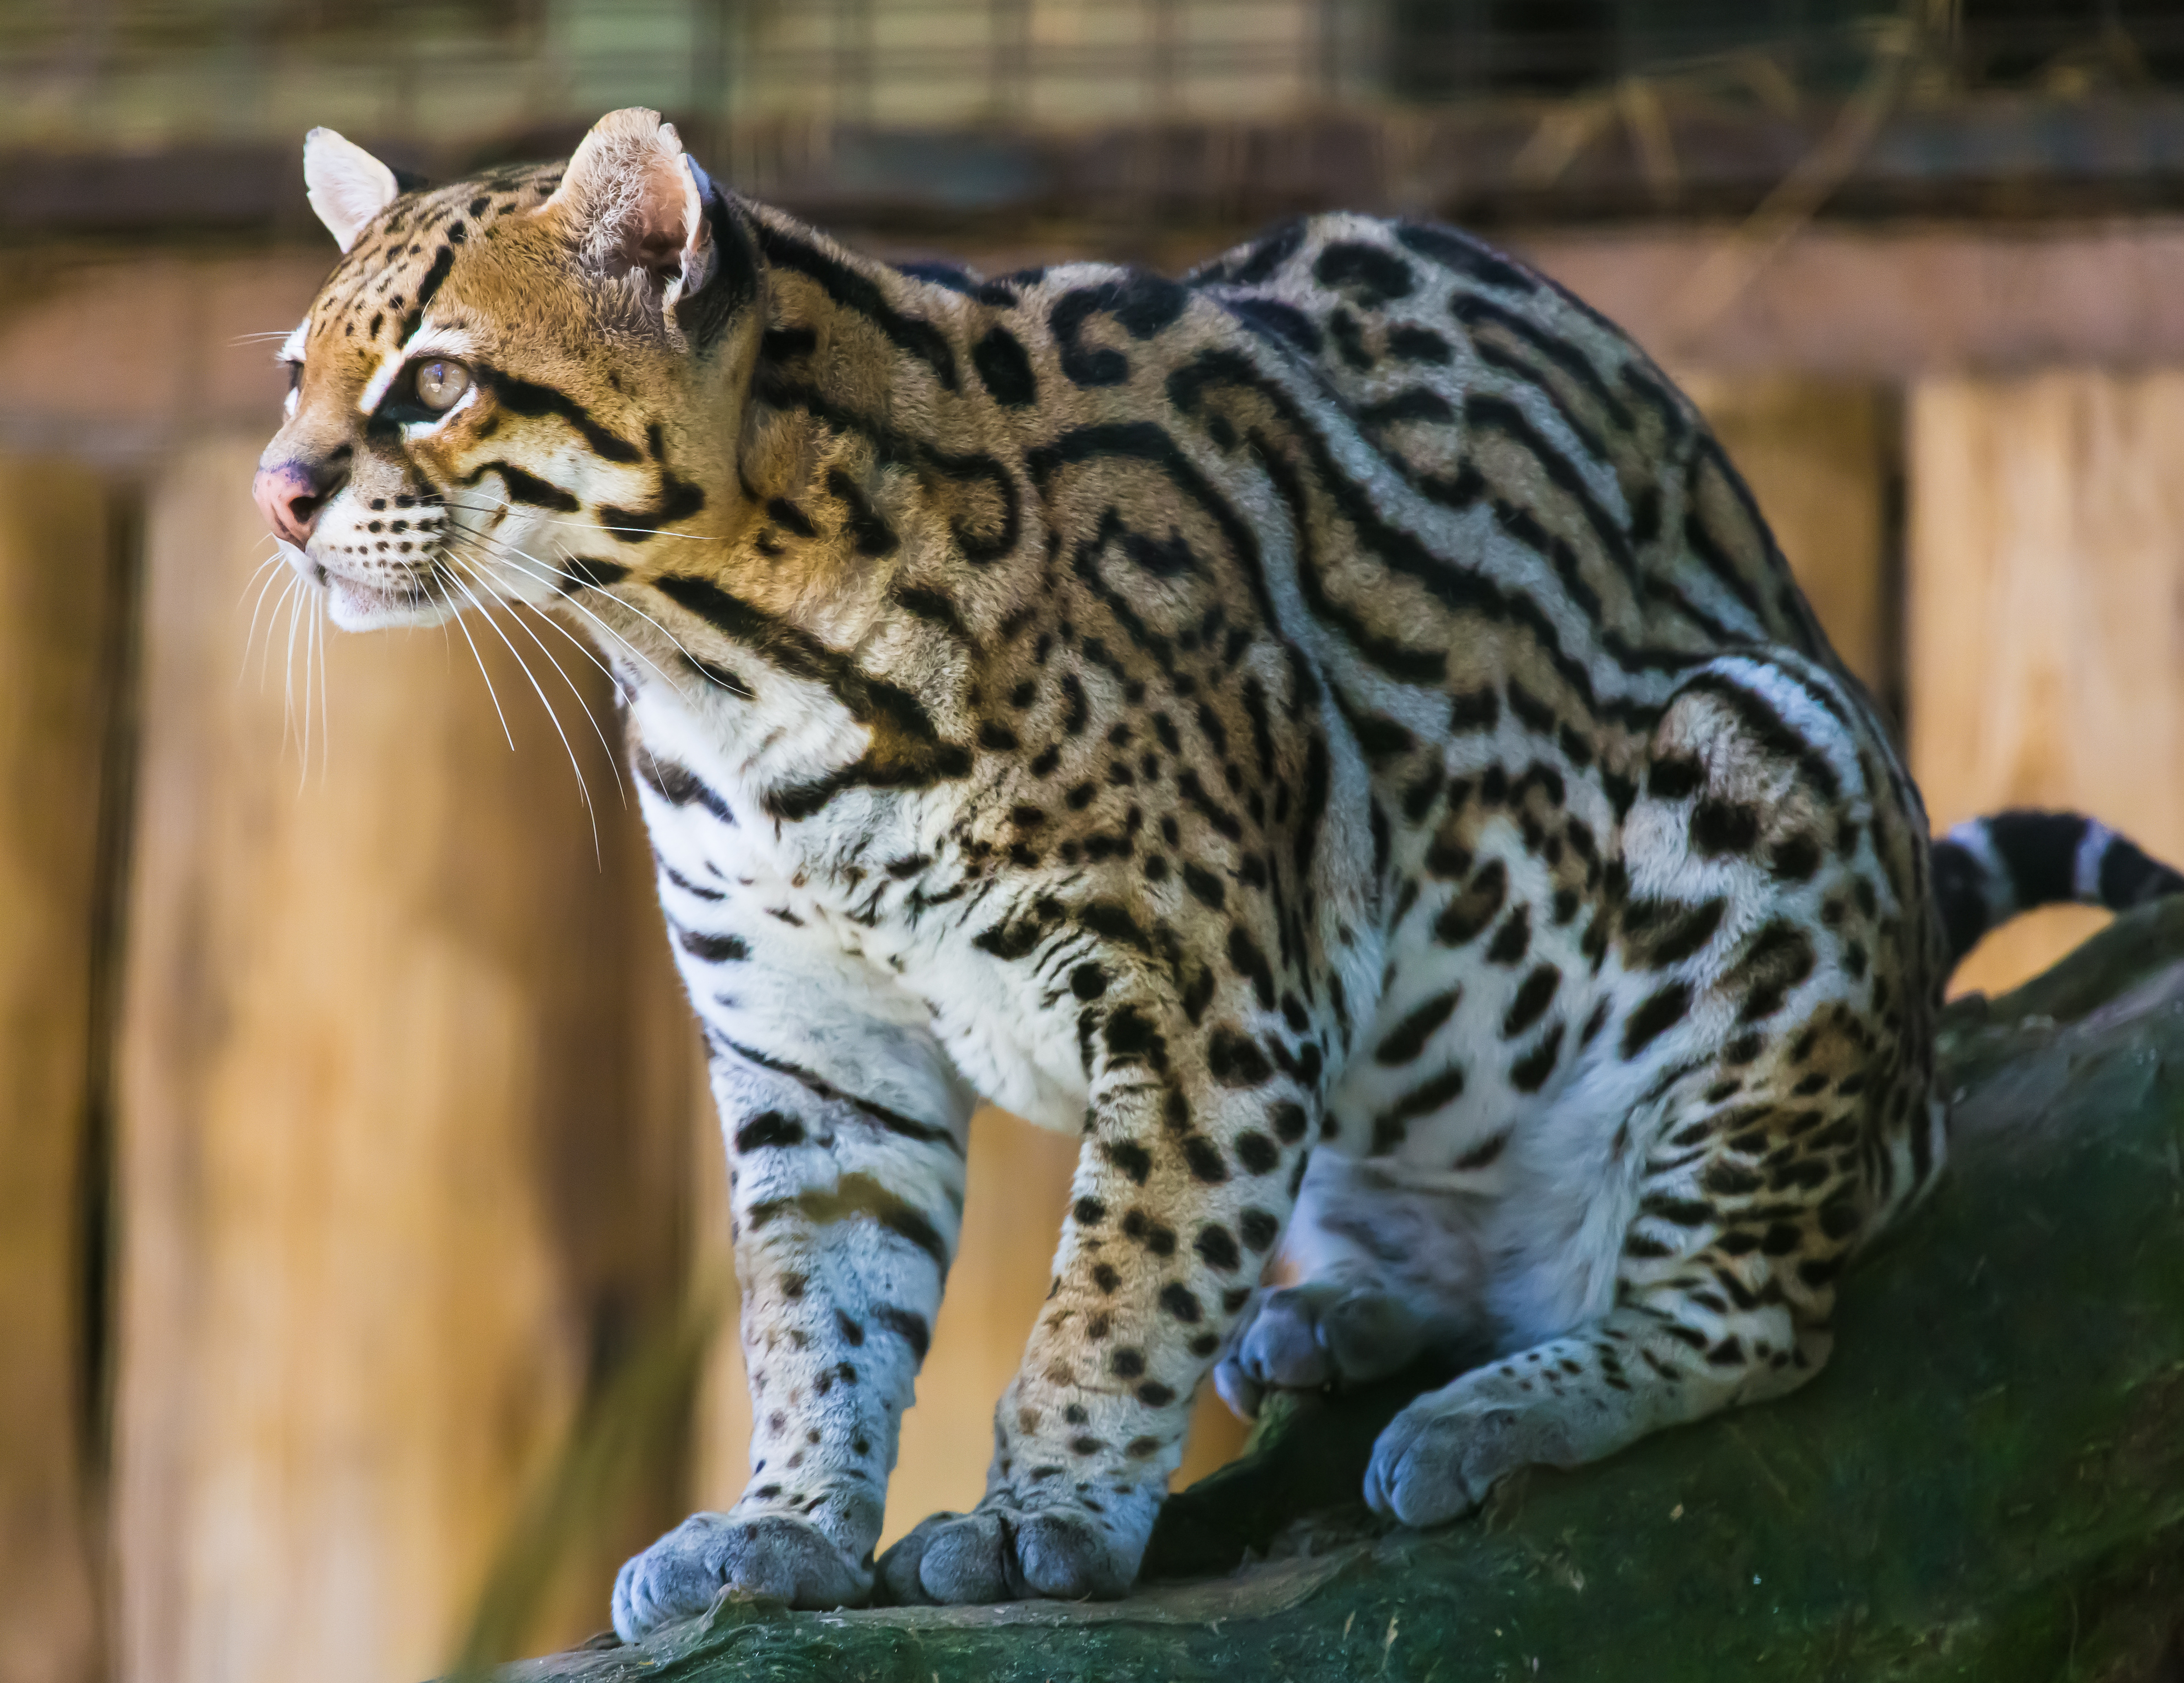 What is the common name for a Ocelot?